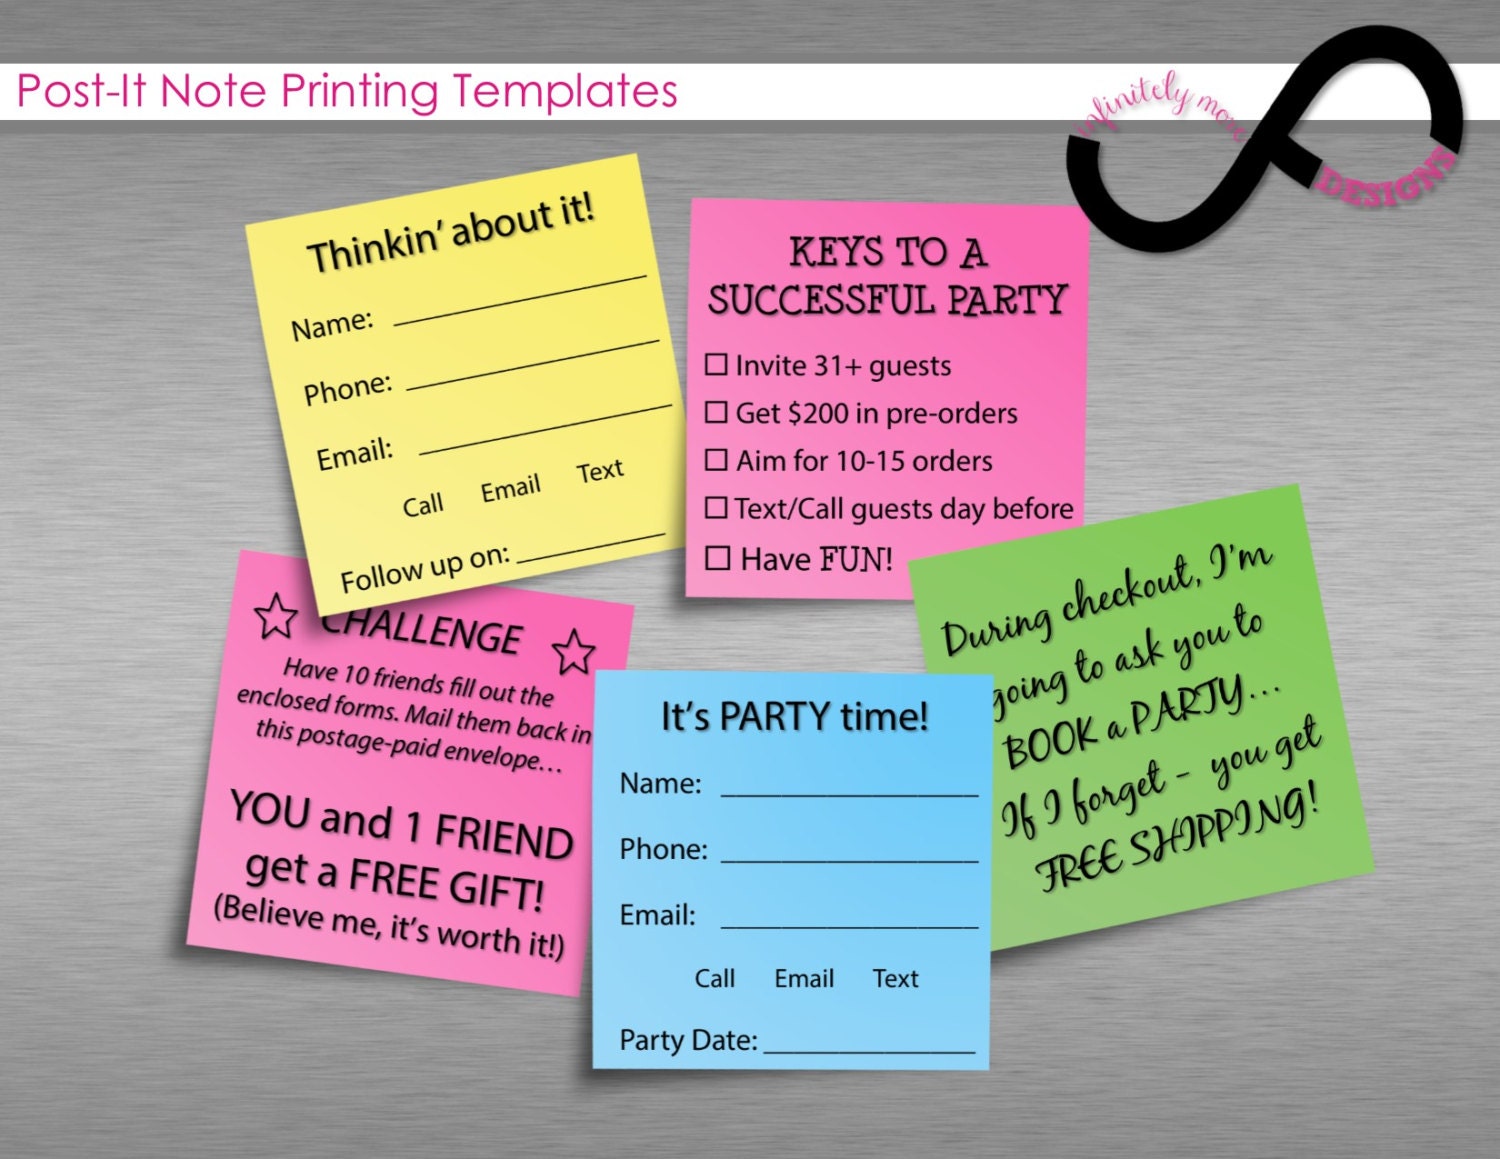 post-it-note-printing-templates-instant-by-infinitelymore-on-etsy